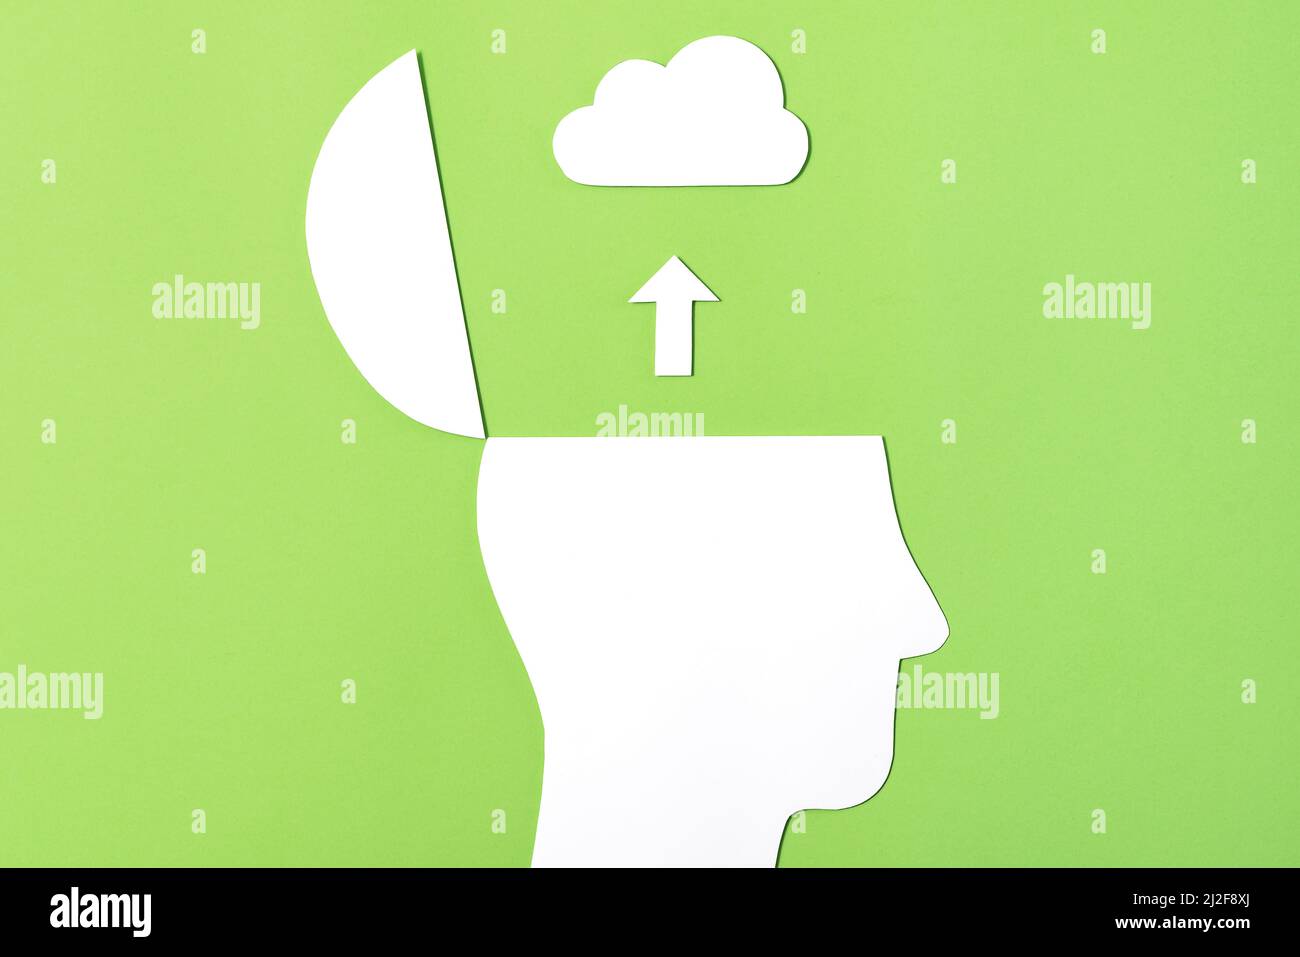 Uploading to Cloud Concept, Paper Cut out Open head with paper cut out Upload Arrow and Cloud. Uploading ones mind to the internet Stock Photo